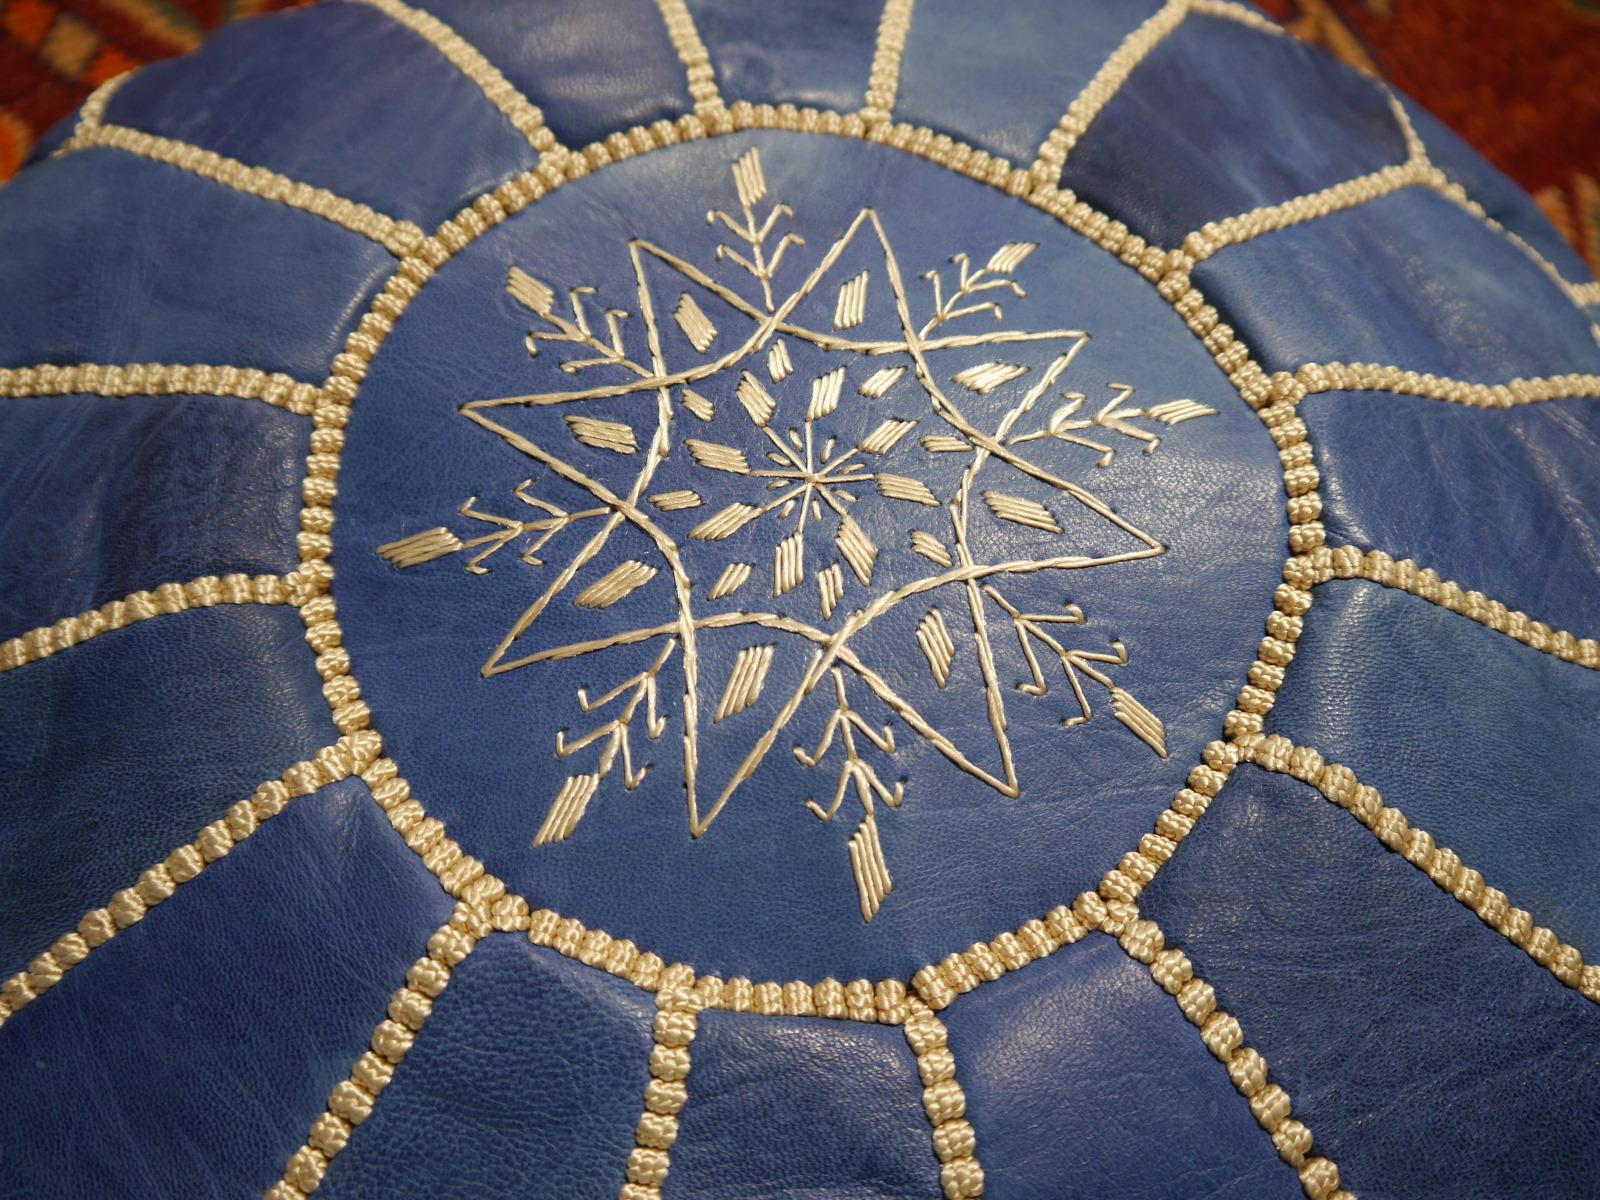 A beautiful handcrafted Moroccan blue leather ottoman pouf
 
Construction
This pouf was handcrafted by Morrocan Artisians. It consists of high quality leather with embroideries and tribal motive on top. This Item will be delivered stuffed with